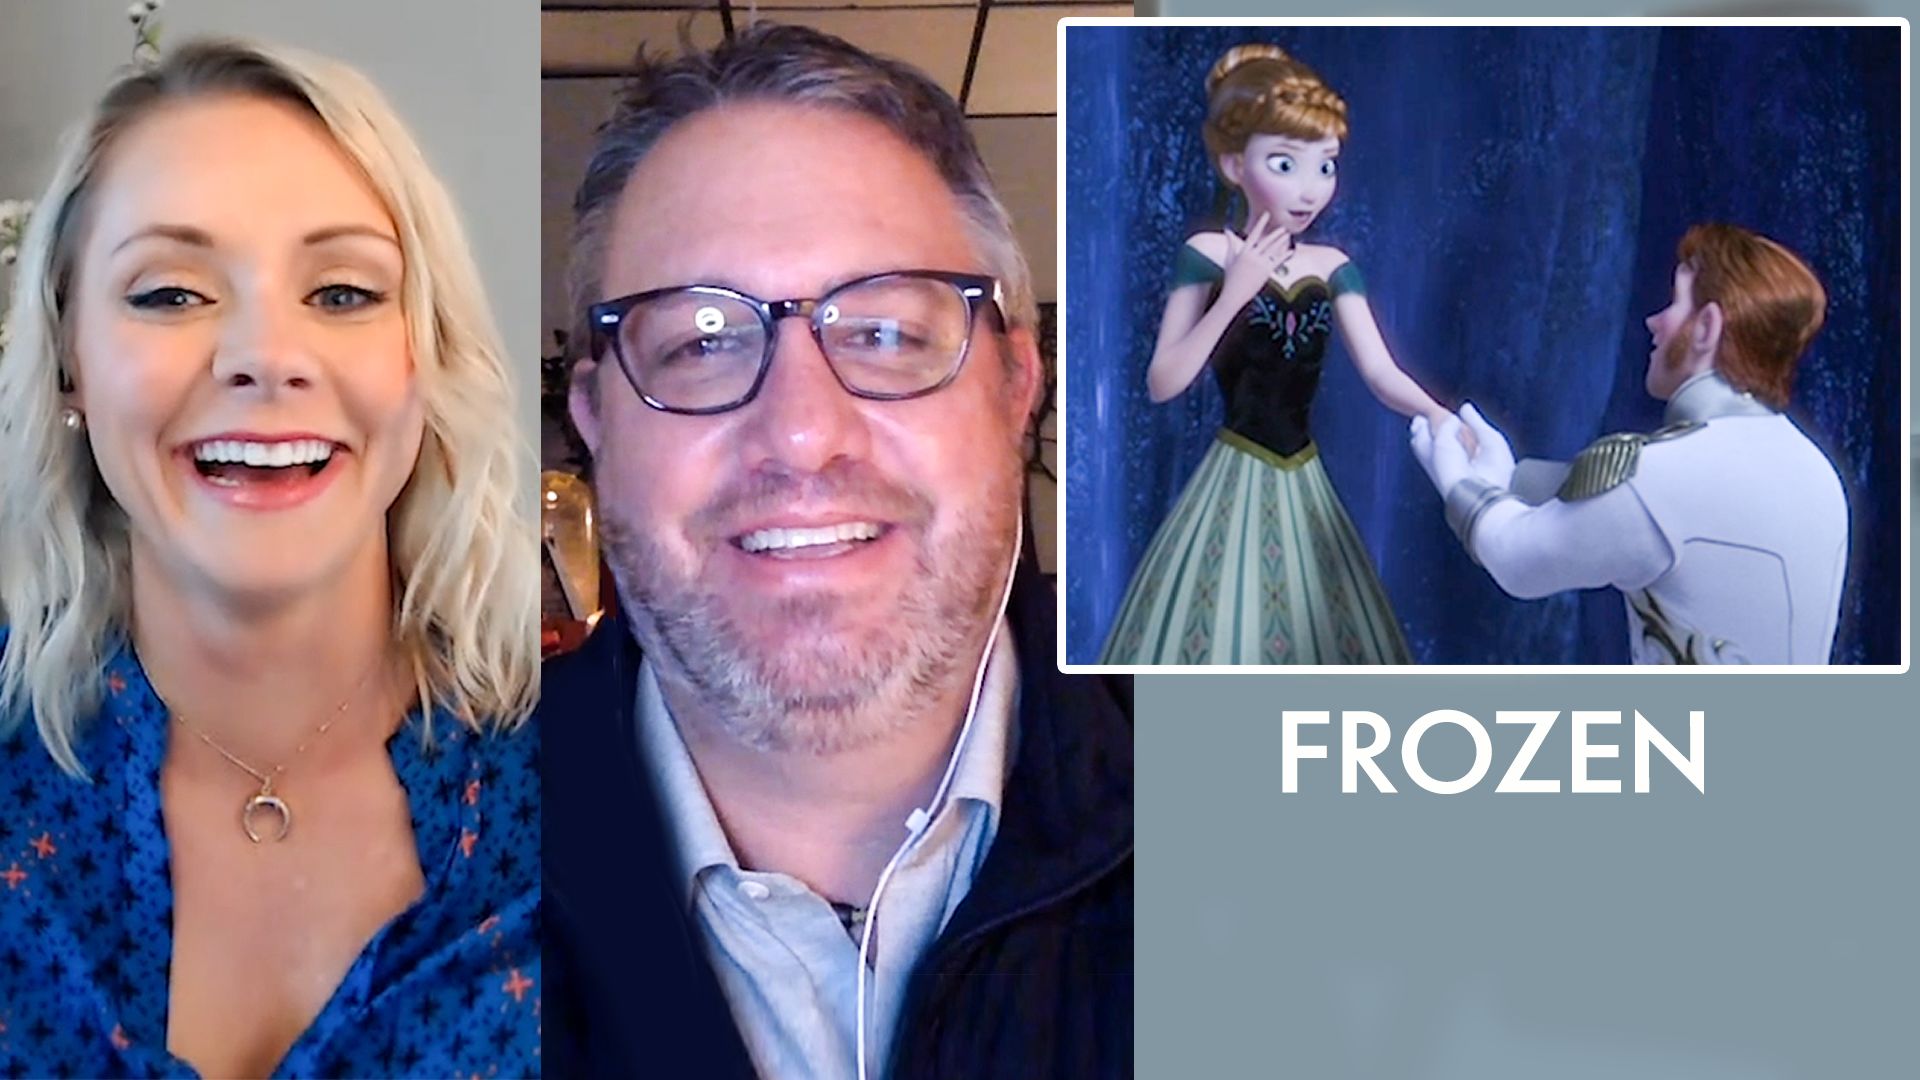 Watch Therapists Review Disney Relationships, from Frozen to The Little Mermaid VF Reviews Vanity Fair